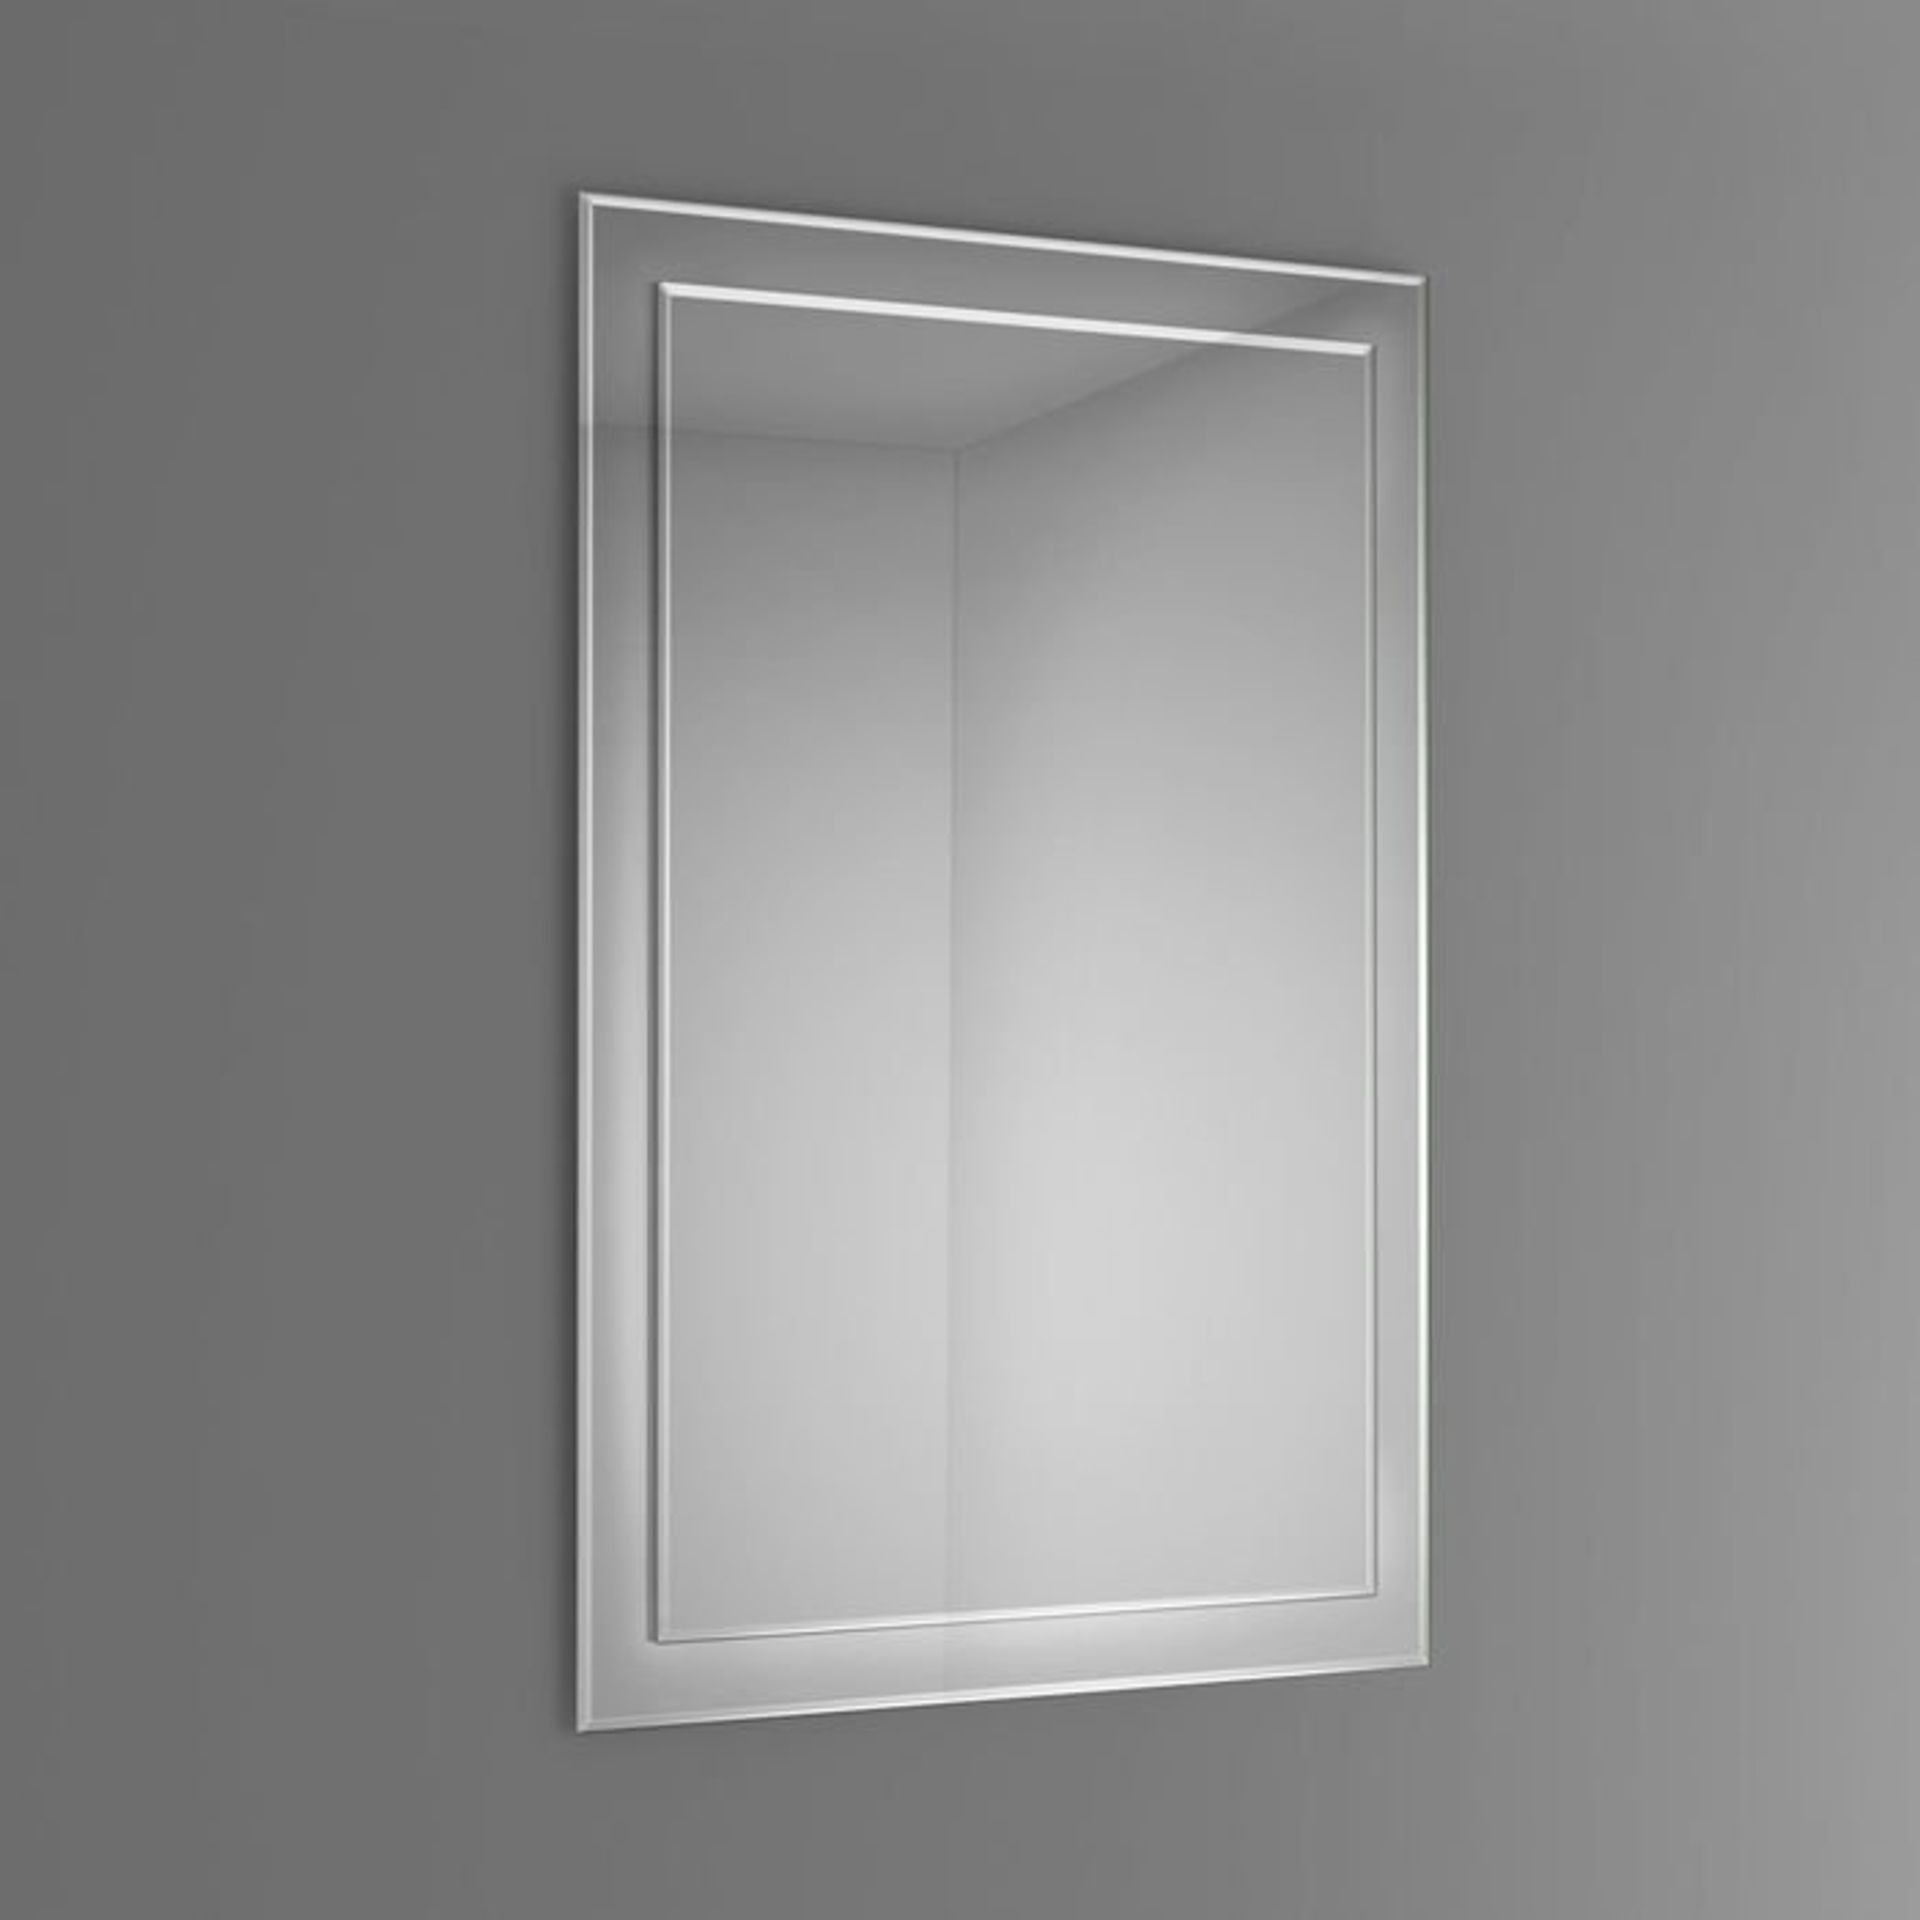 (L117) 500x700mm Bevel Mirror. RRP £79.99. Smooth beveled edge for additional safety and style - Image 3 of 3